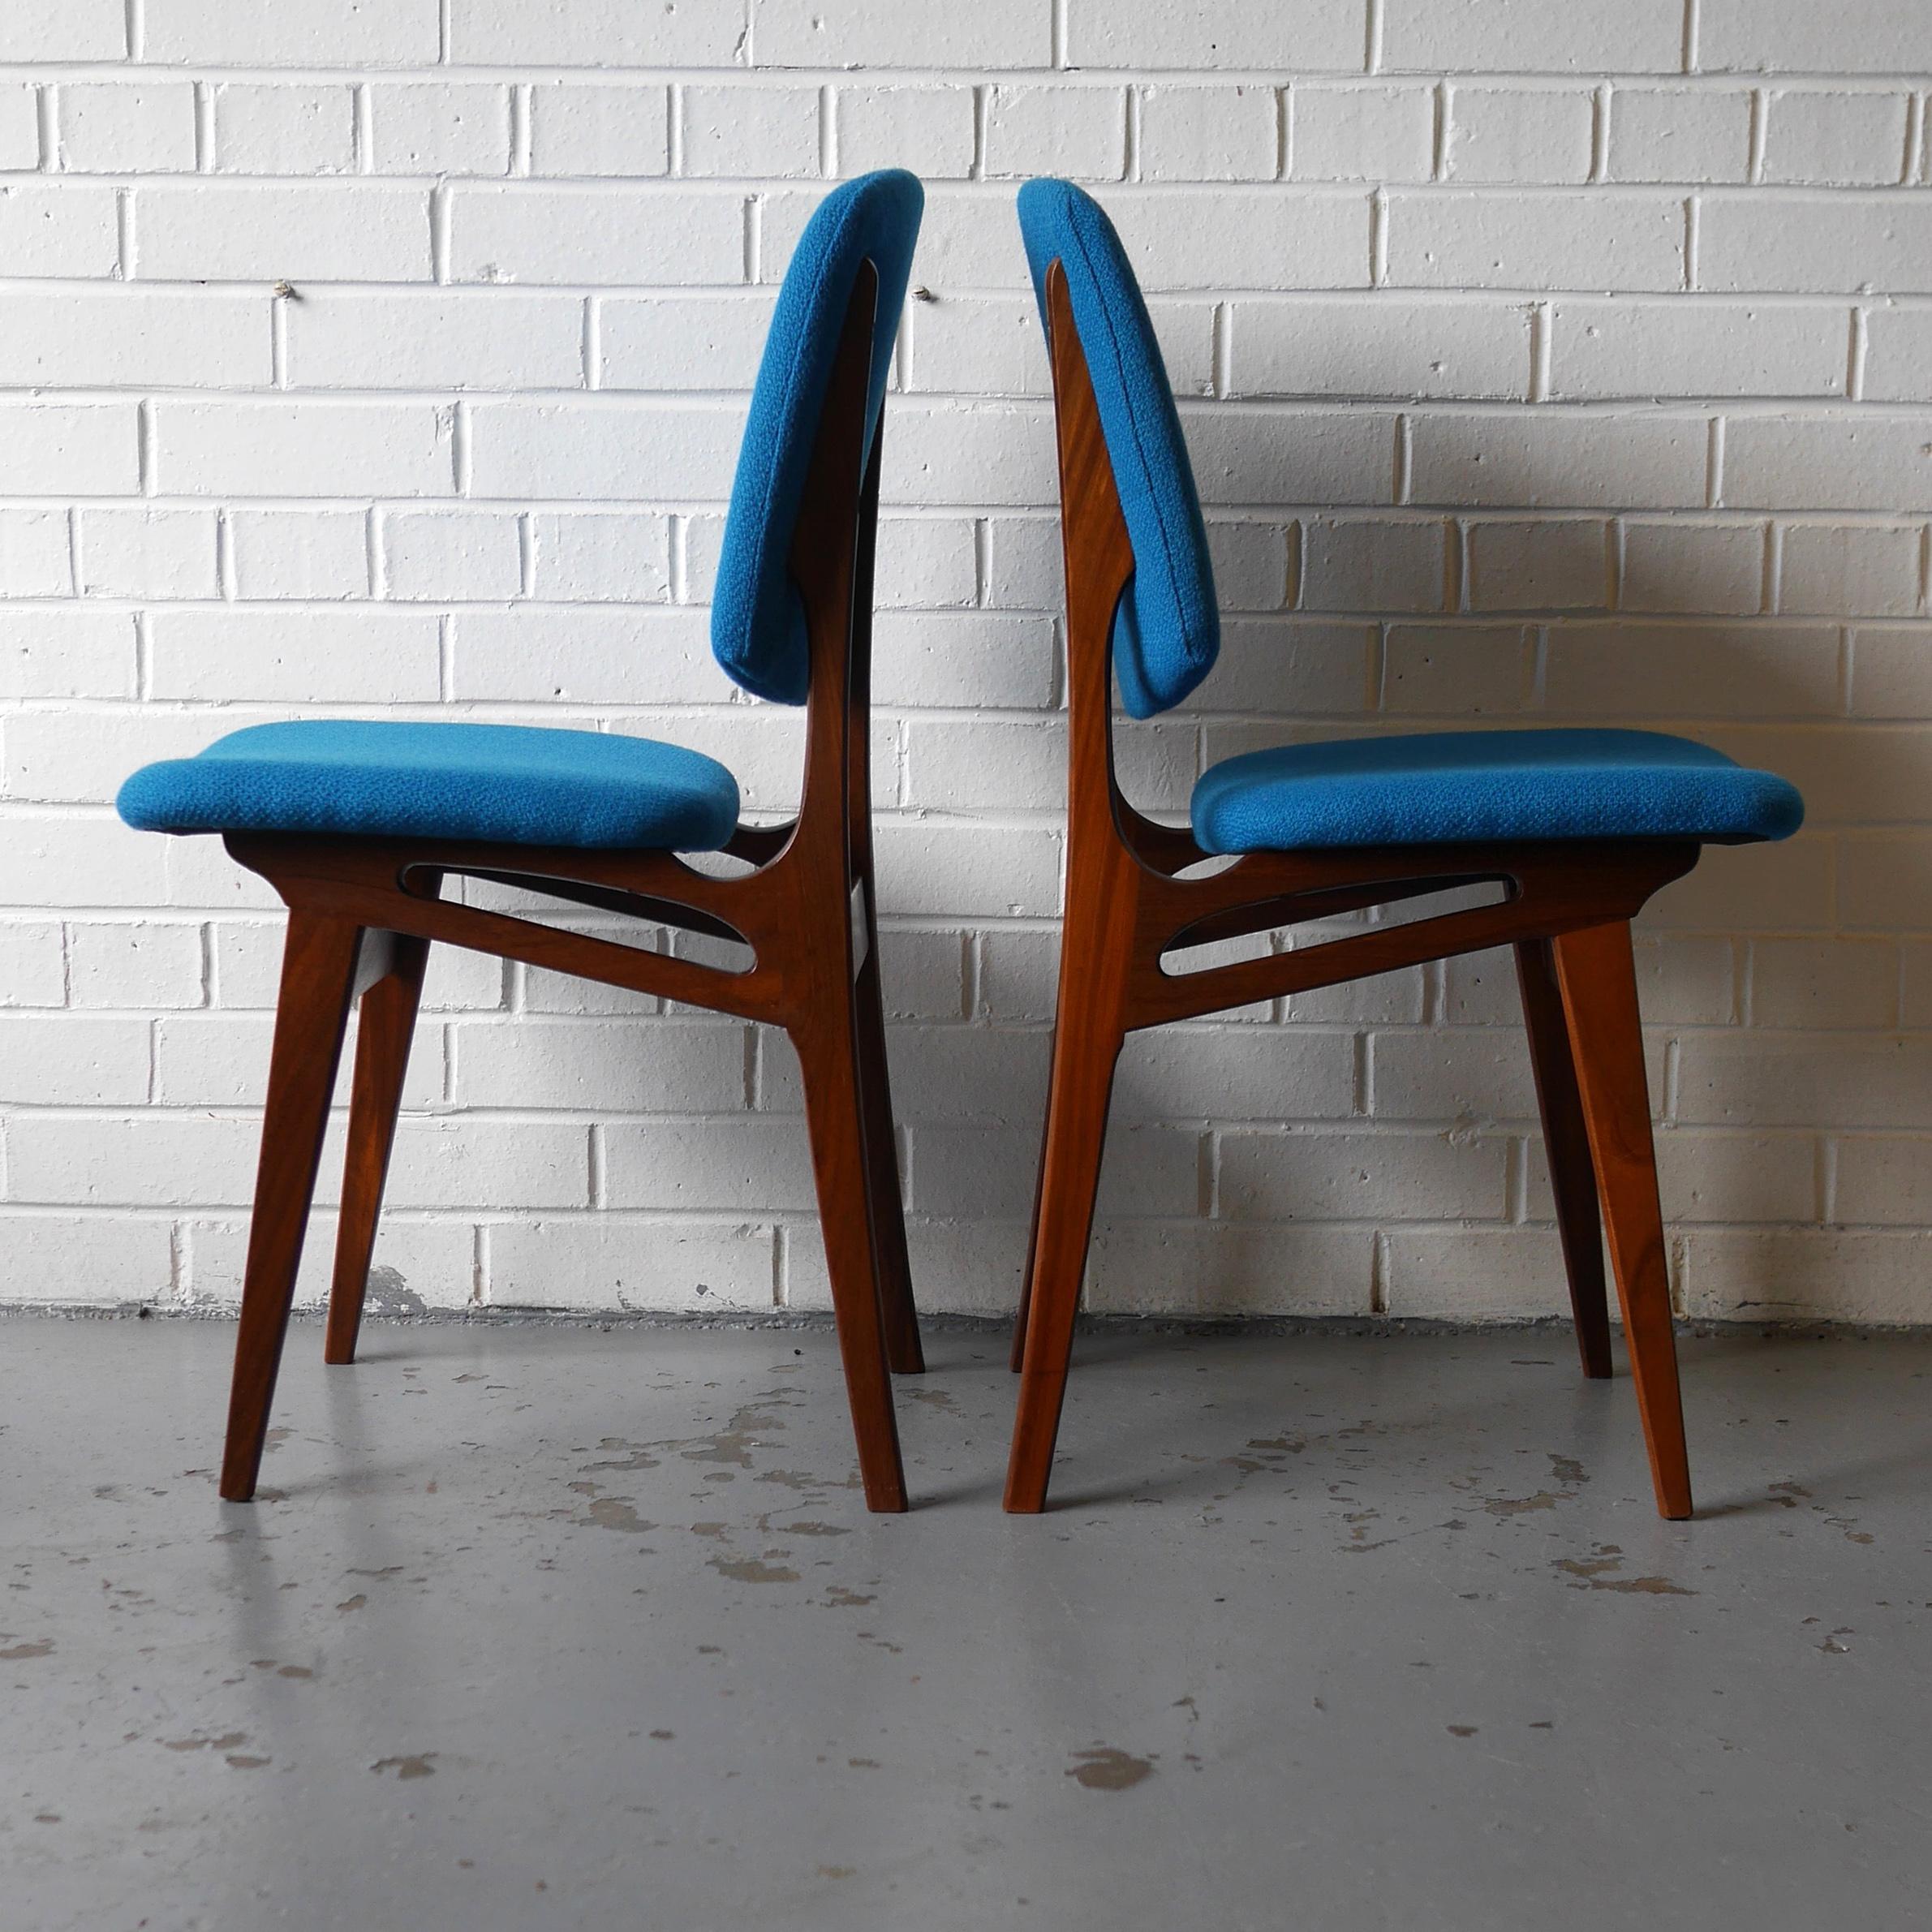 Set of Four Solid Afrormosia Dining Chairs with Blue Wool Upholstery, circa 1961 For Sale 1